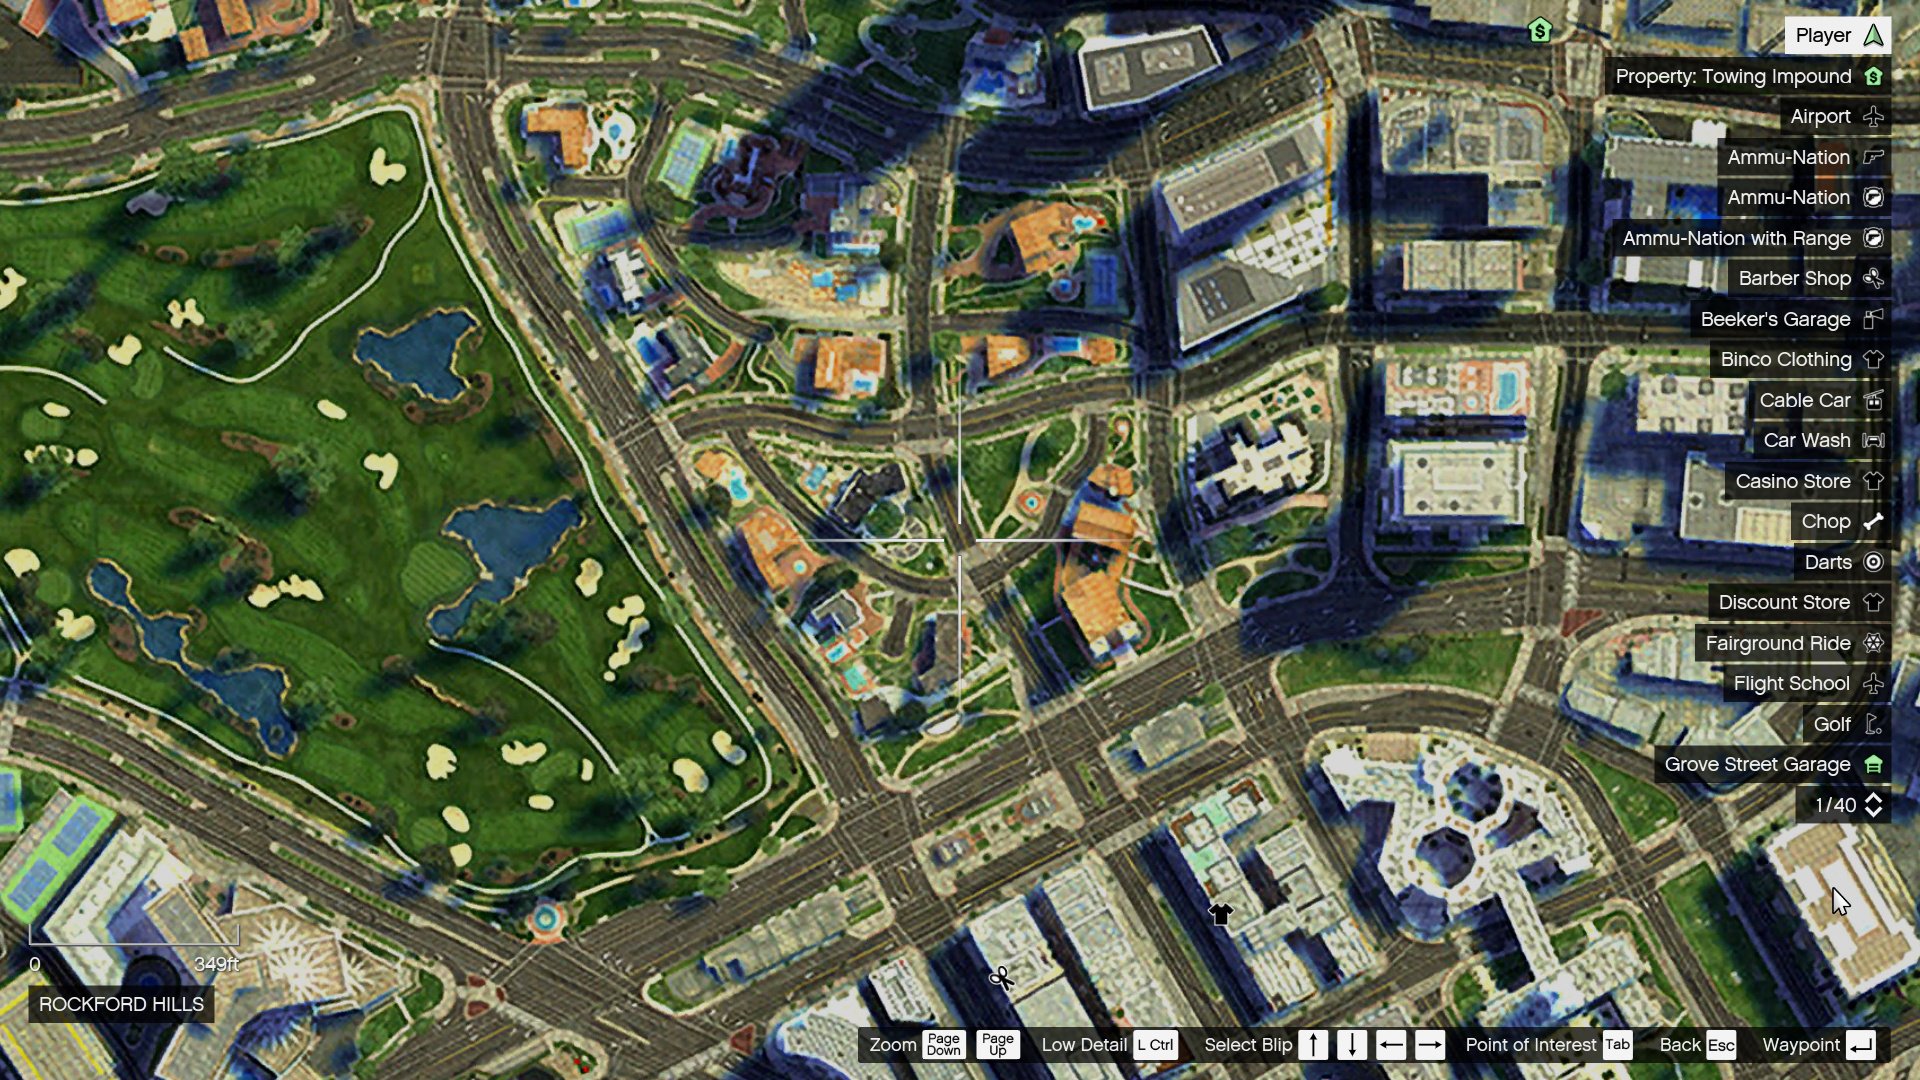 Download Satellite Map HD (with zoom) for GTA 5